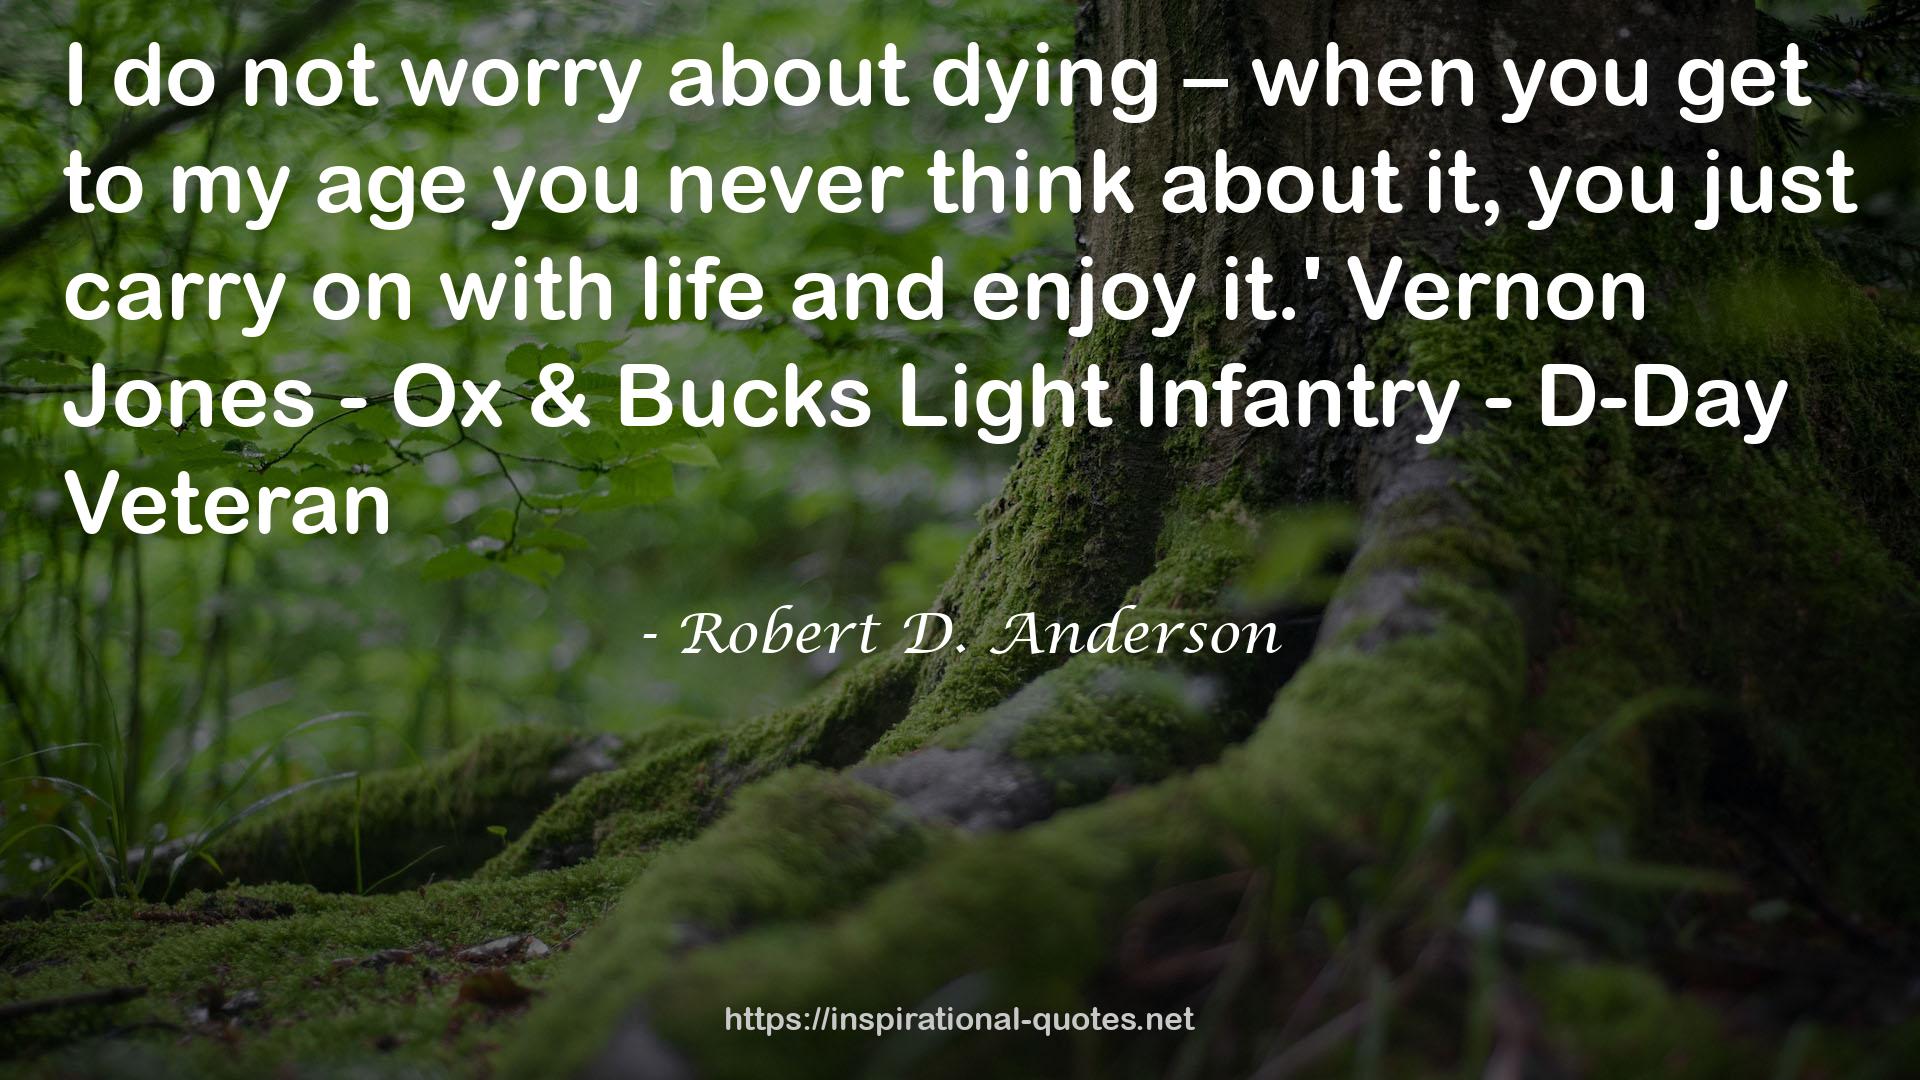 Robert D. Anderson QUOTES